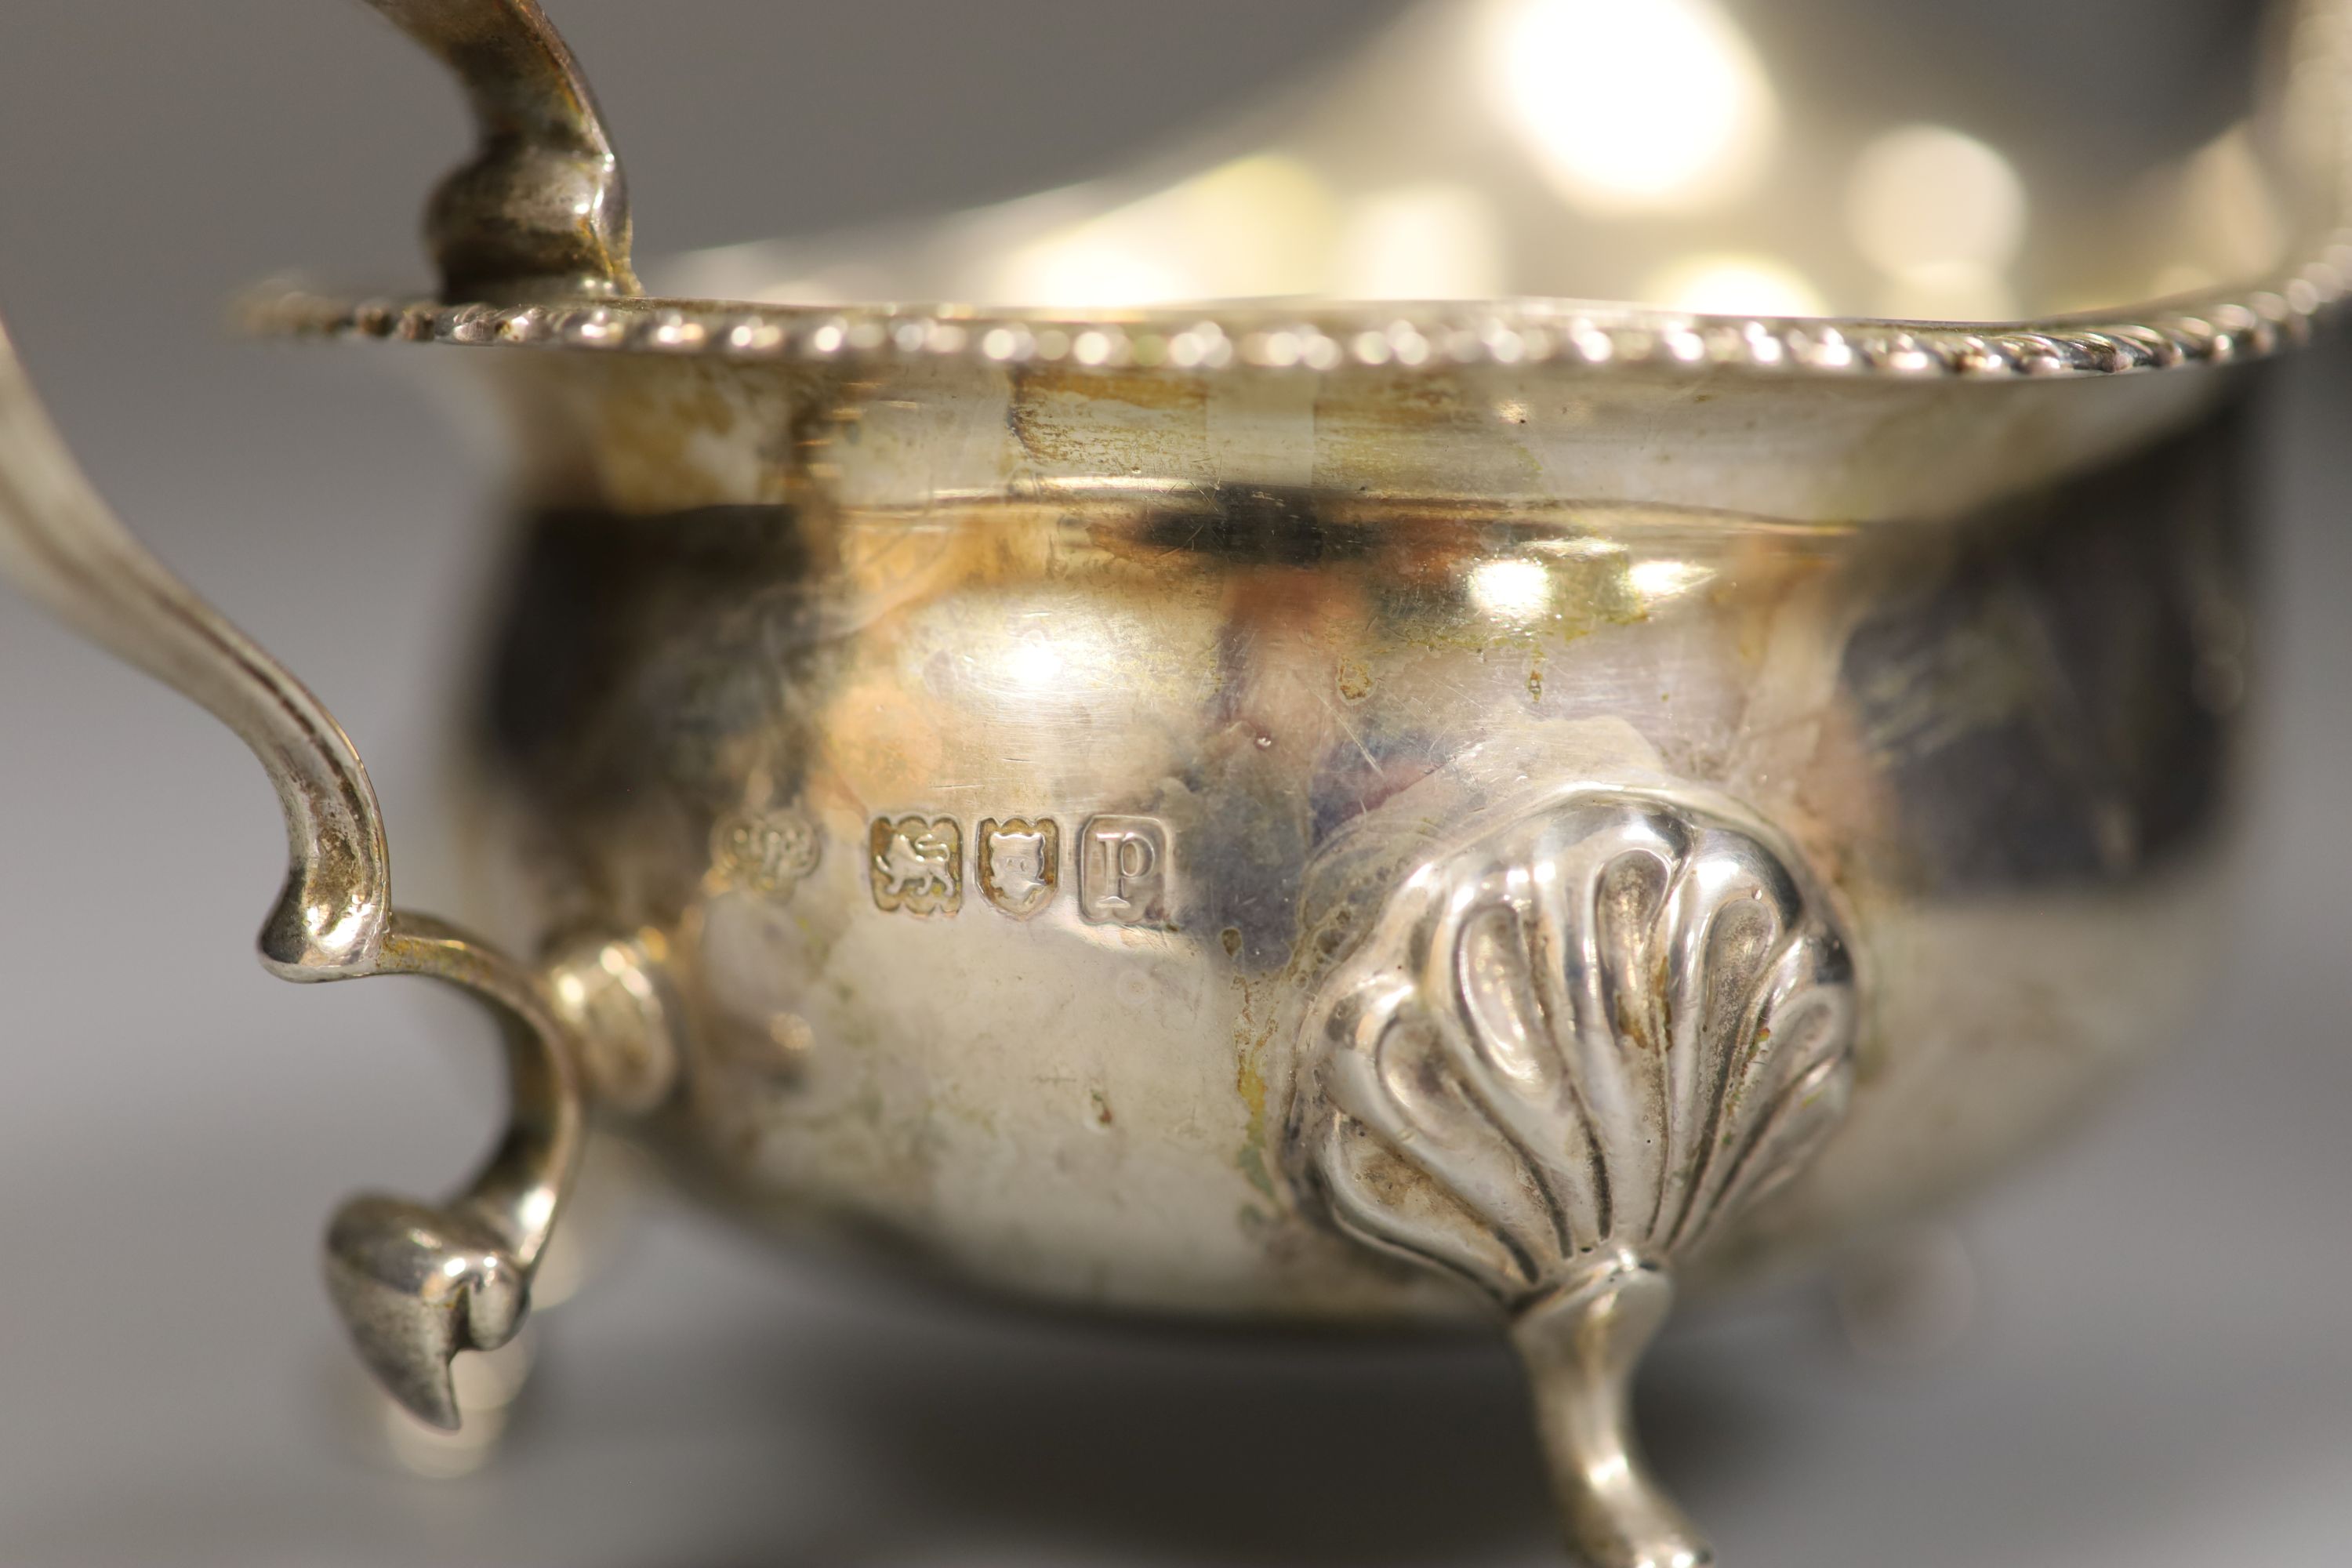 A pair of George V silver sauceboats, Goldsmiths & Silversmiths Co Ltd, London, 1910, height 8cm, 12oz.